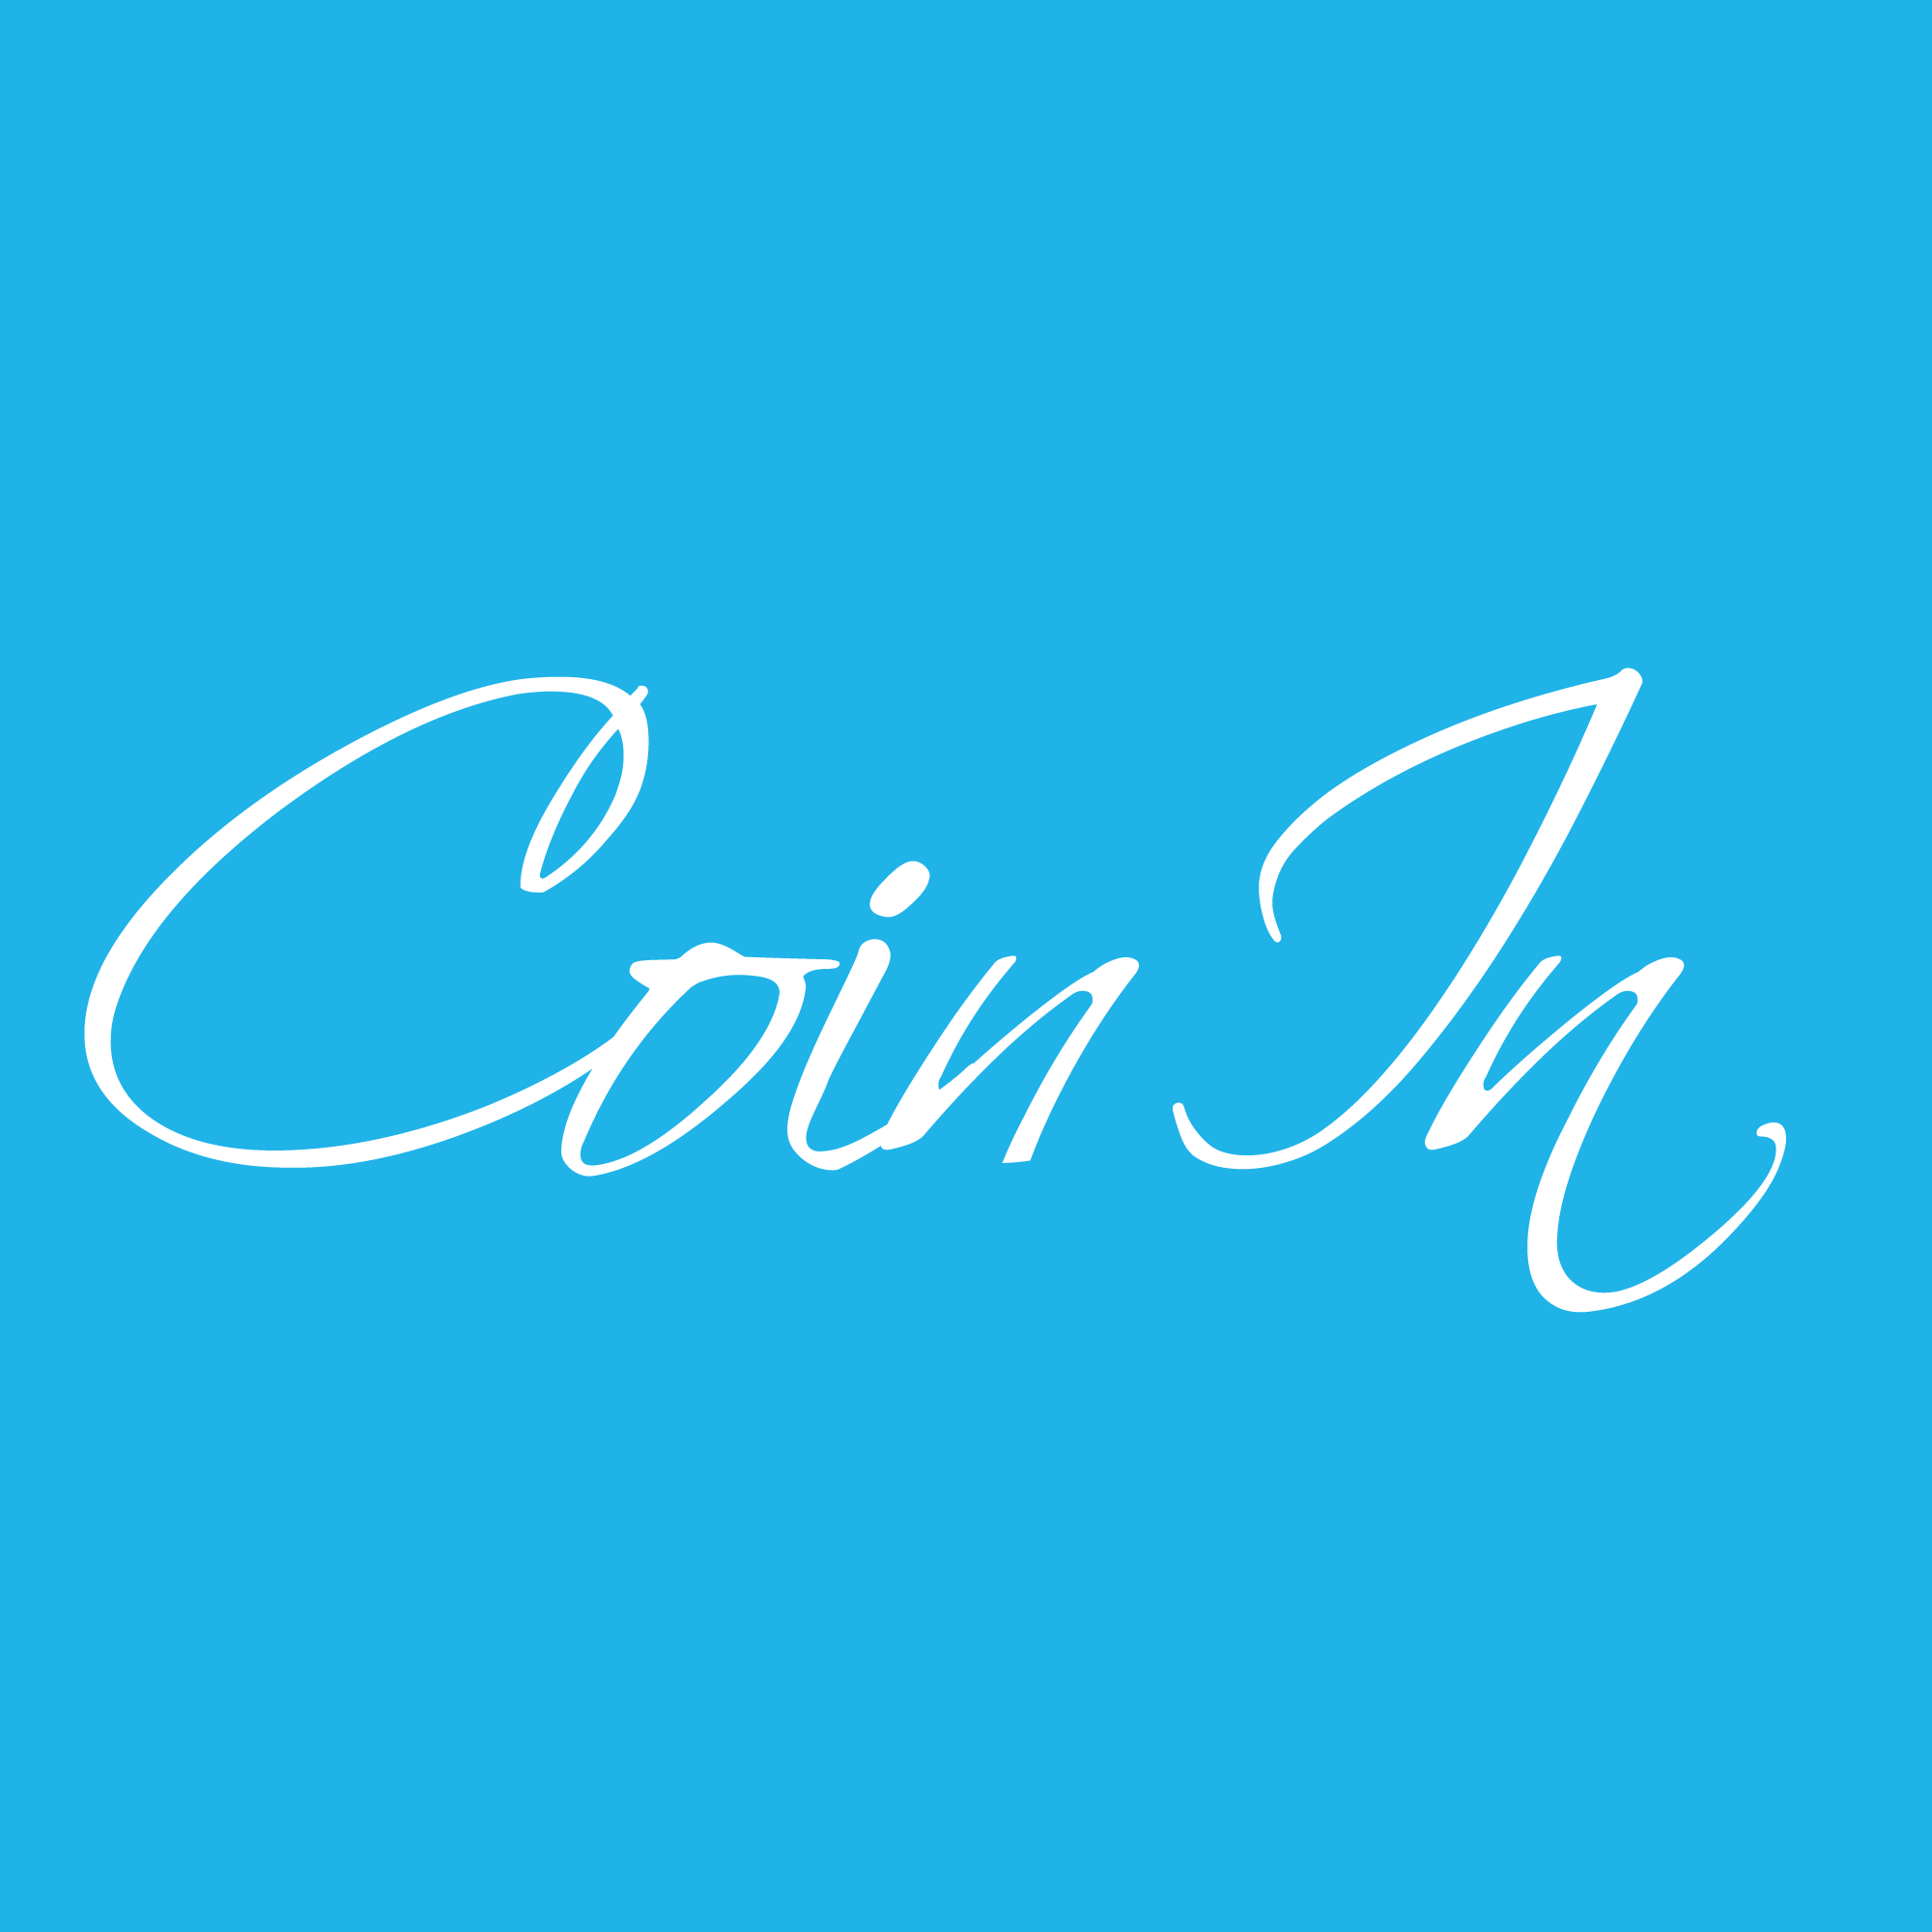 Coin-In